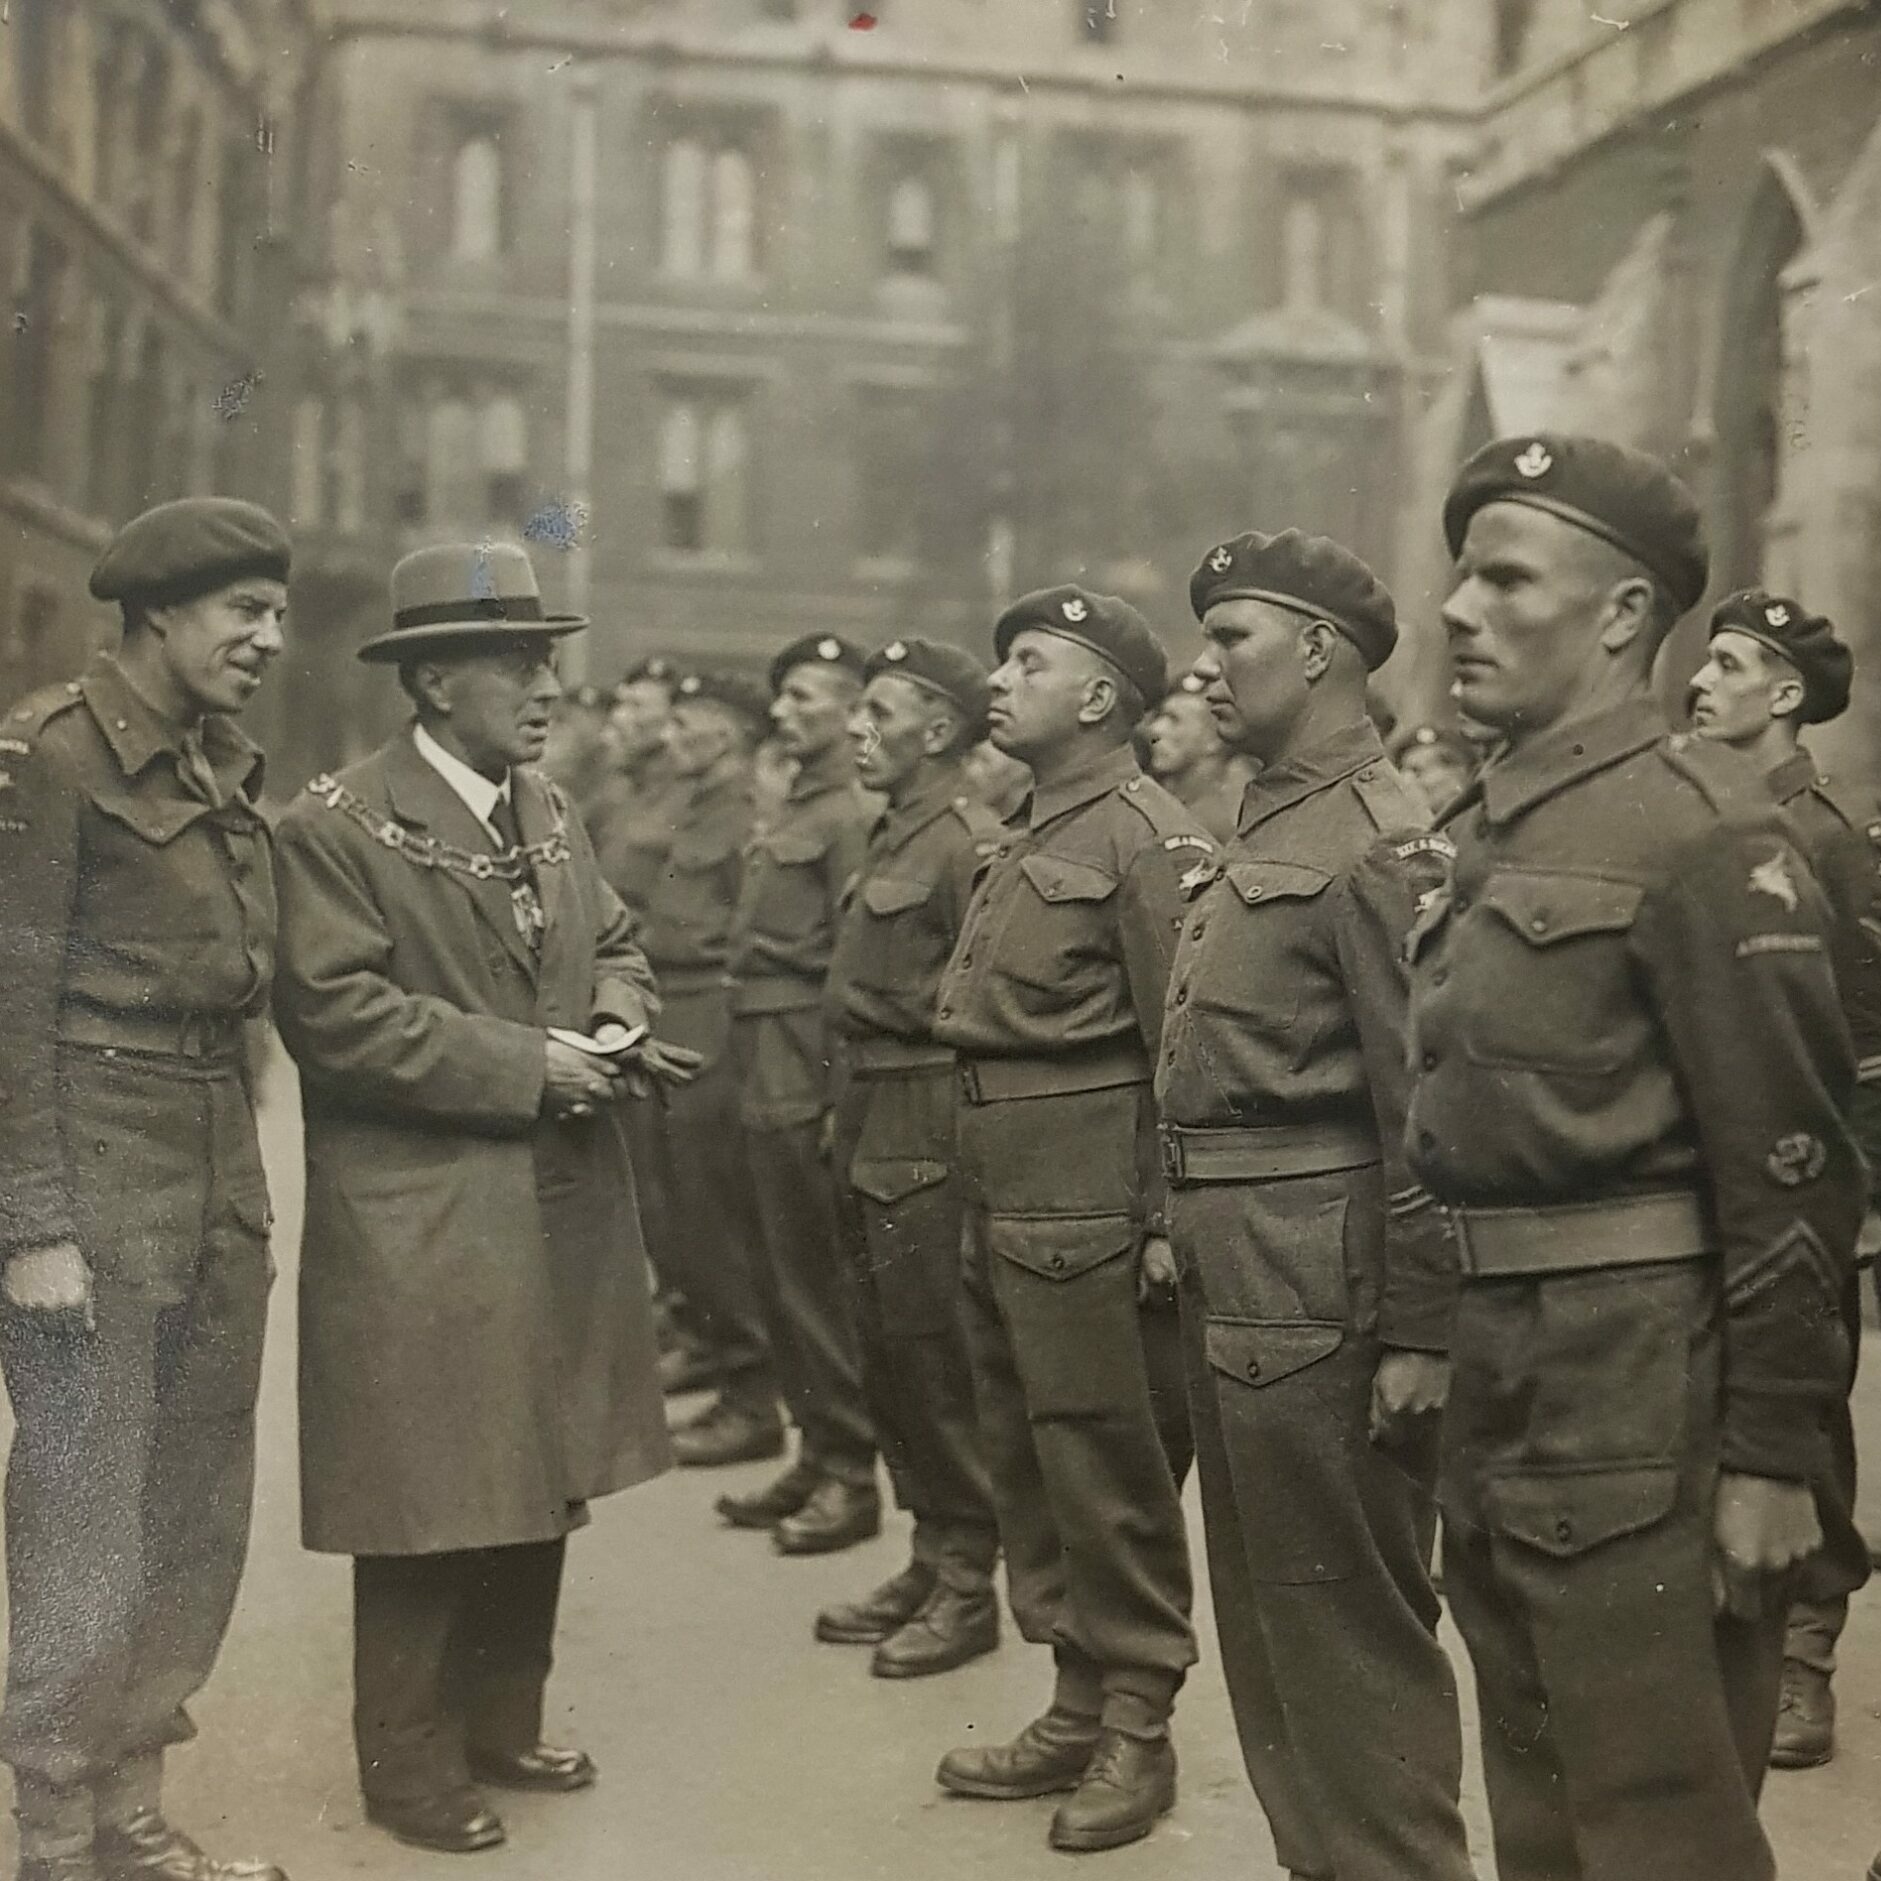 Major-John-Howard-with-soldiers-of-2nd-Battalion-Oxfordshire-and-Buckinghamshire-Light-Infantry-during-Oxford-Salute-the-Soldier-celebration-May-1944.jpeg